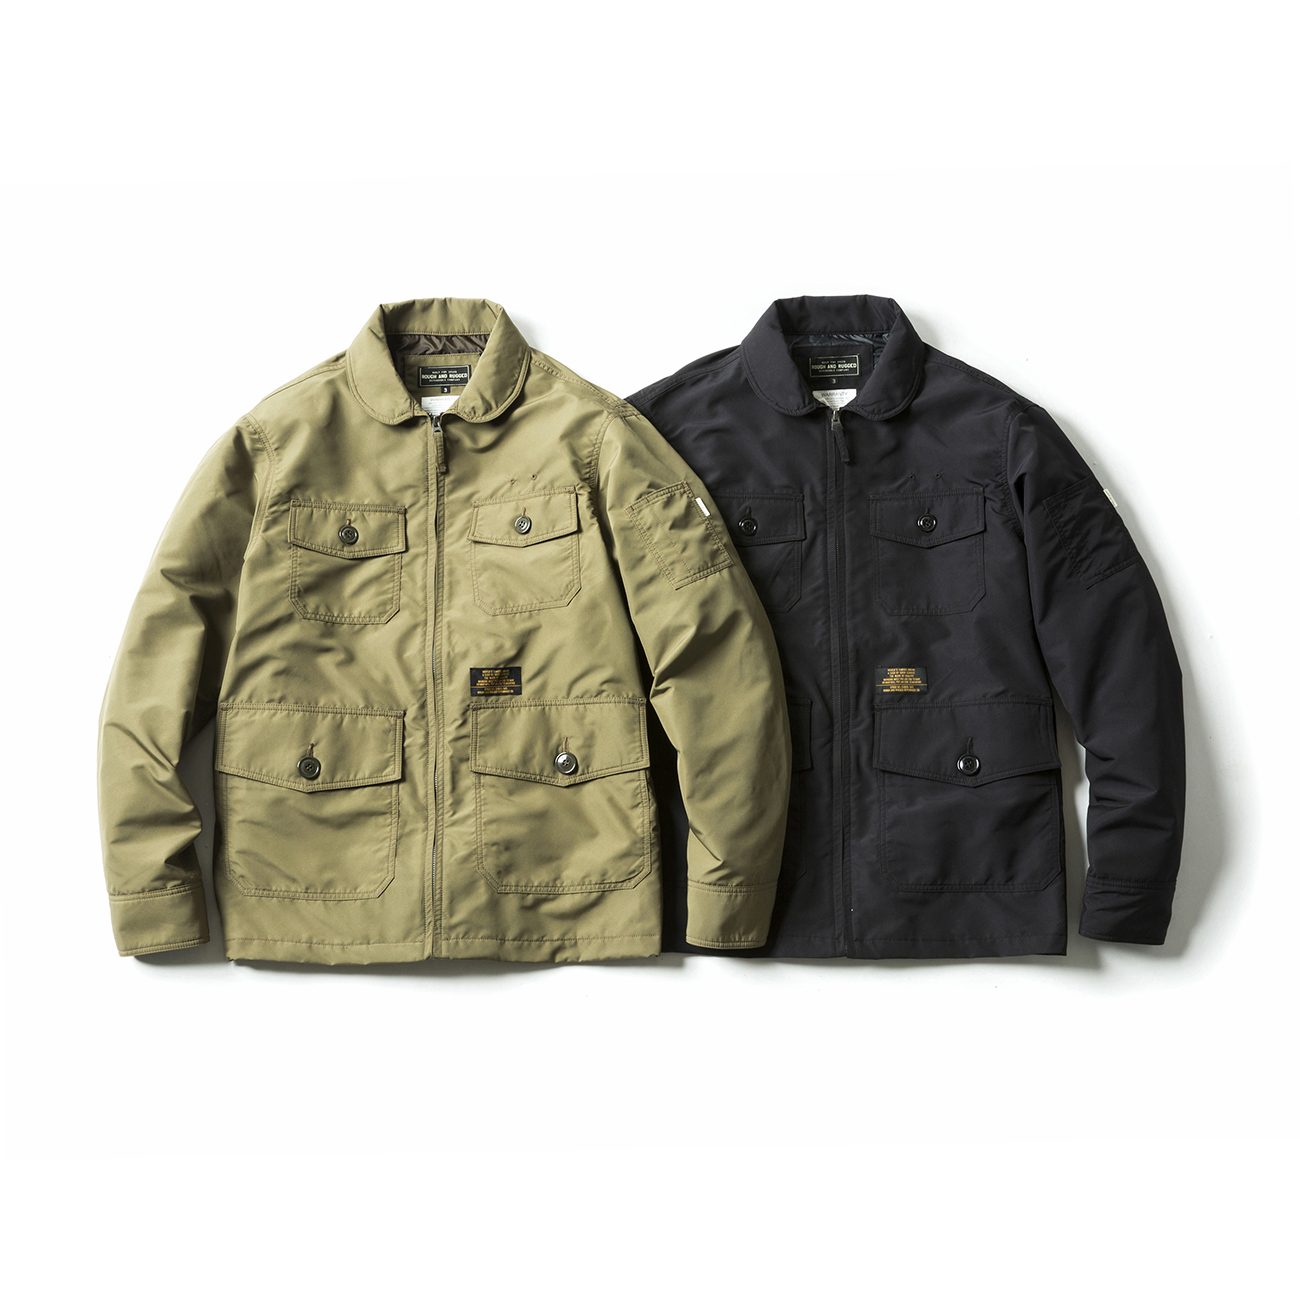 2017 2nd ITEM | Rough and rugged